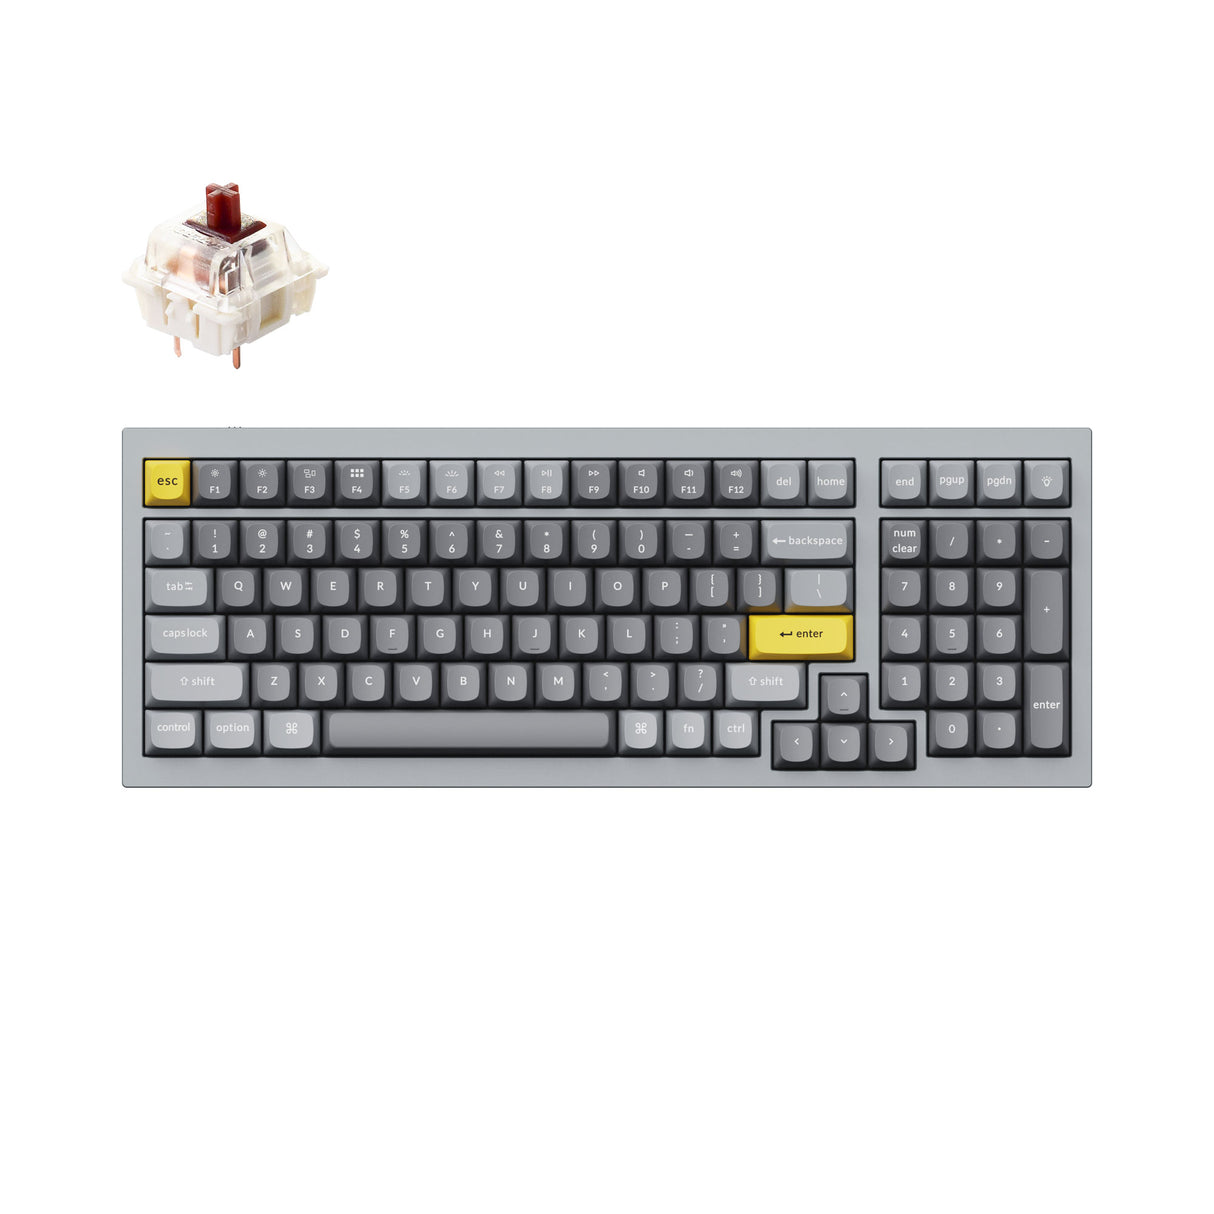 Keychron Q5 QMK VIA custom mechanical keyboard 1800 compact 96 percent layout full aluminum grey frame for Mac Windows RGB backlight with hot swappable Gateron G Pro switch brown